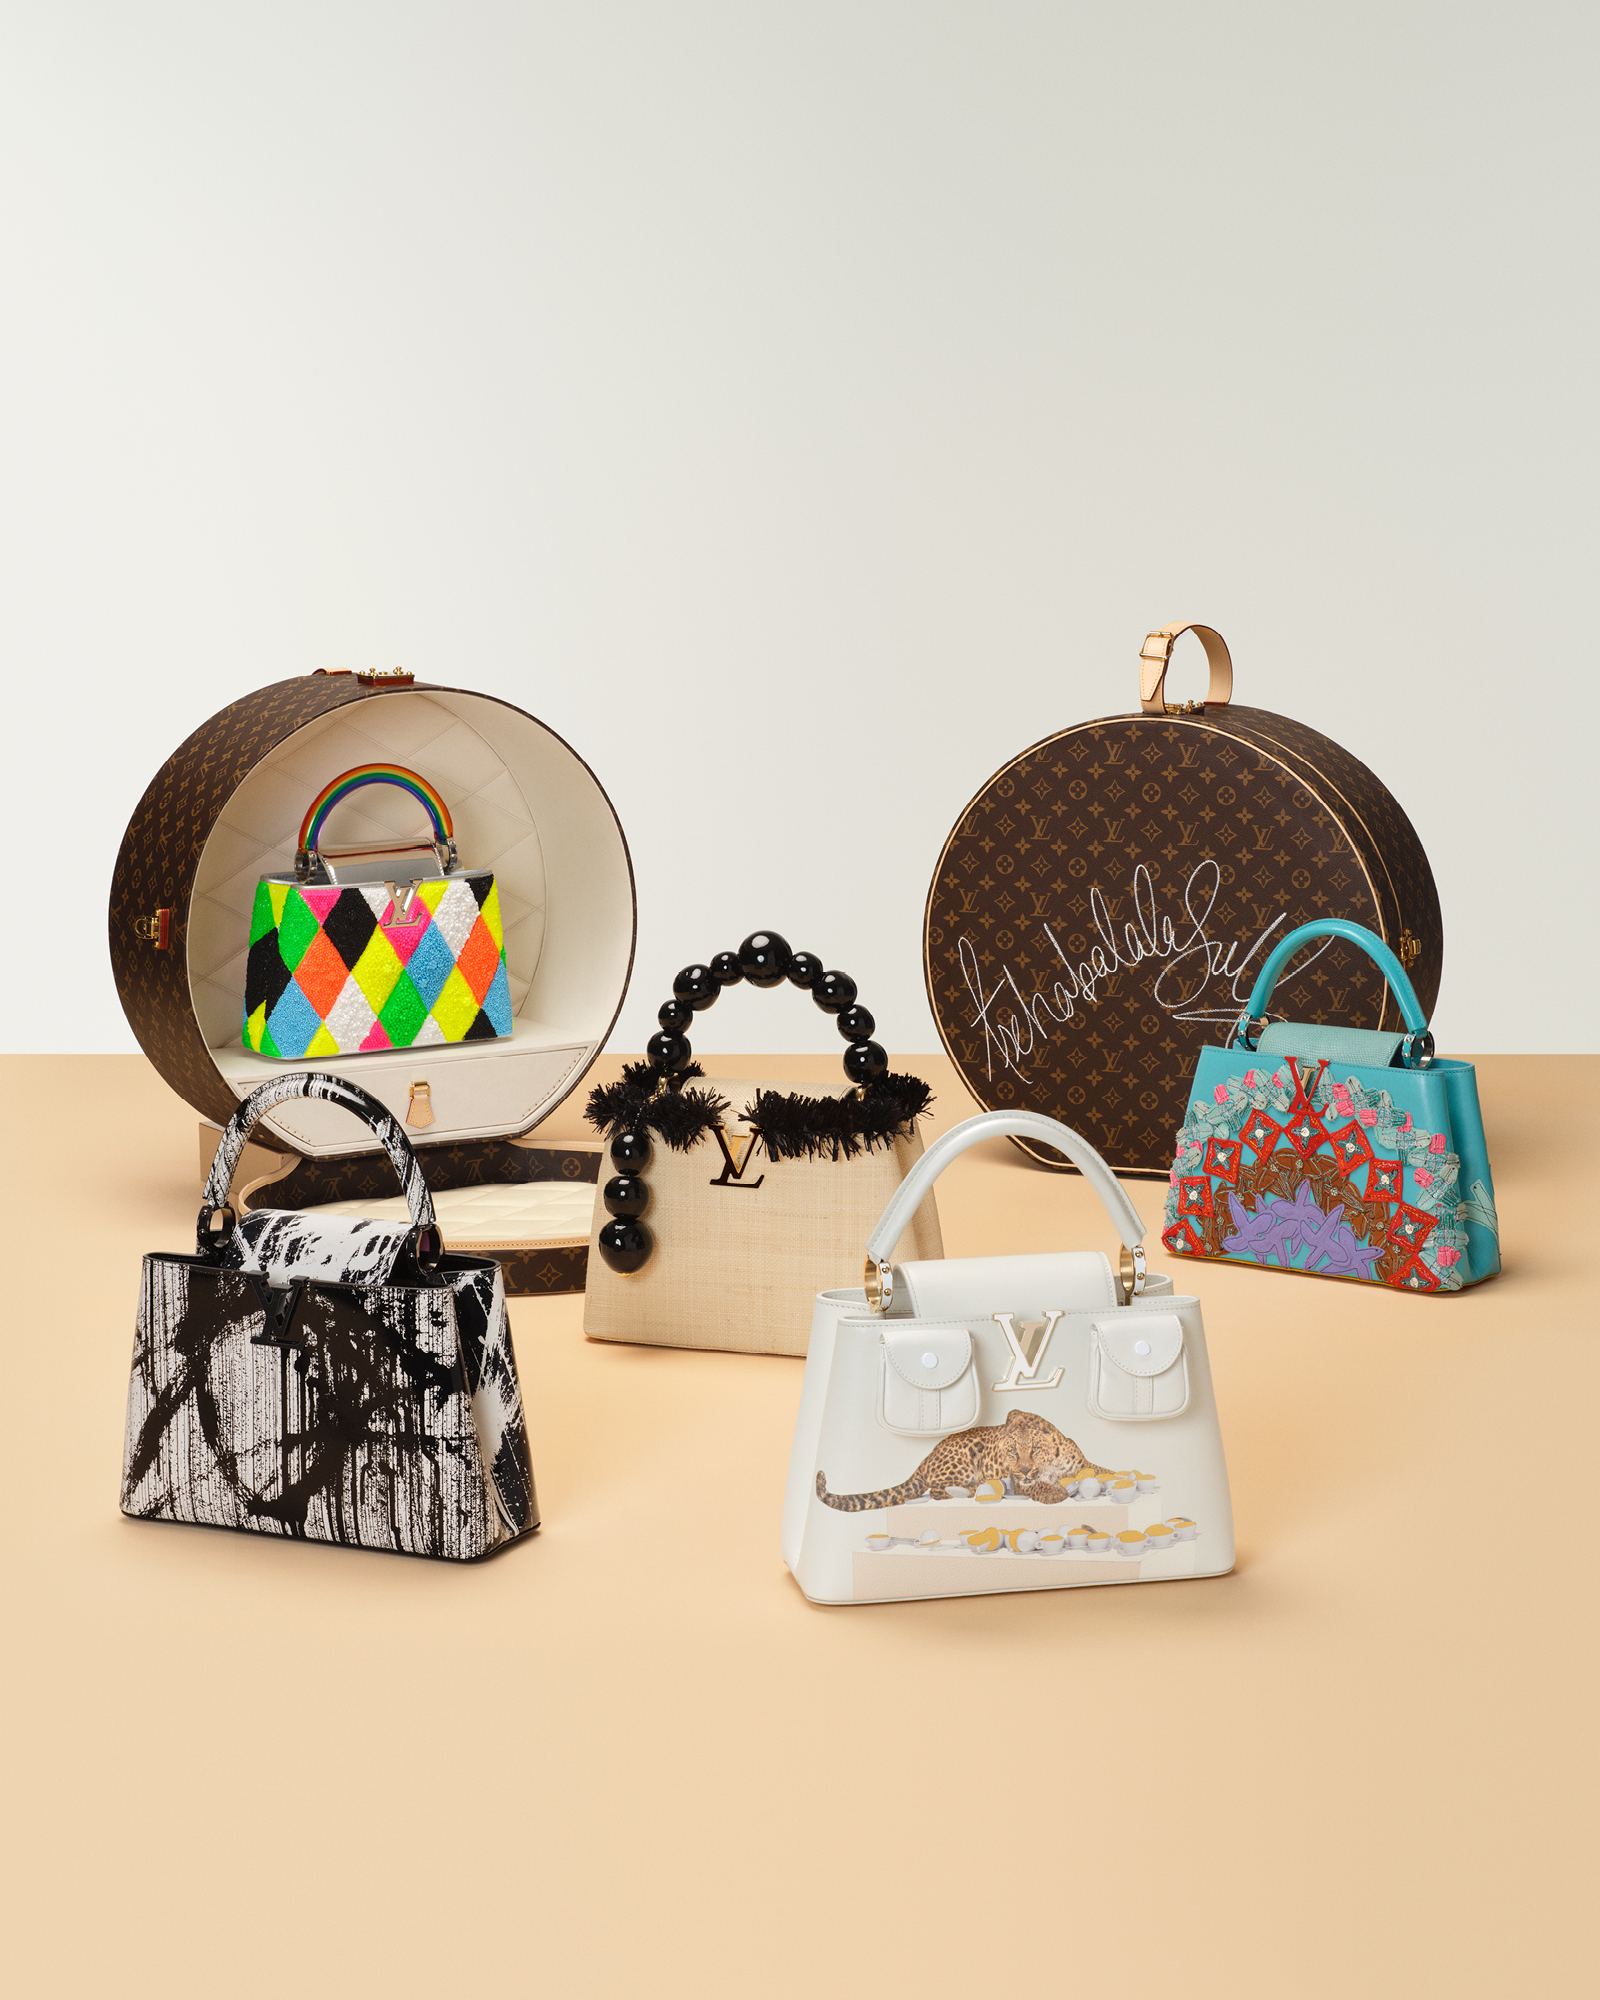 Louis Vuitton And Sothebys Set To Auction 22 Artycapucines Bags - V Magazine